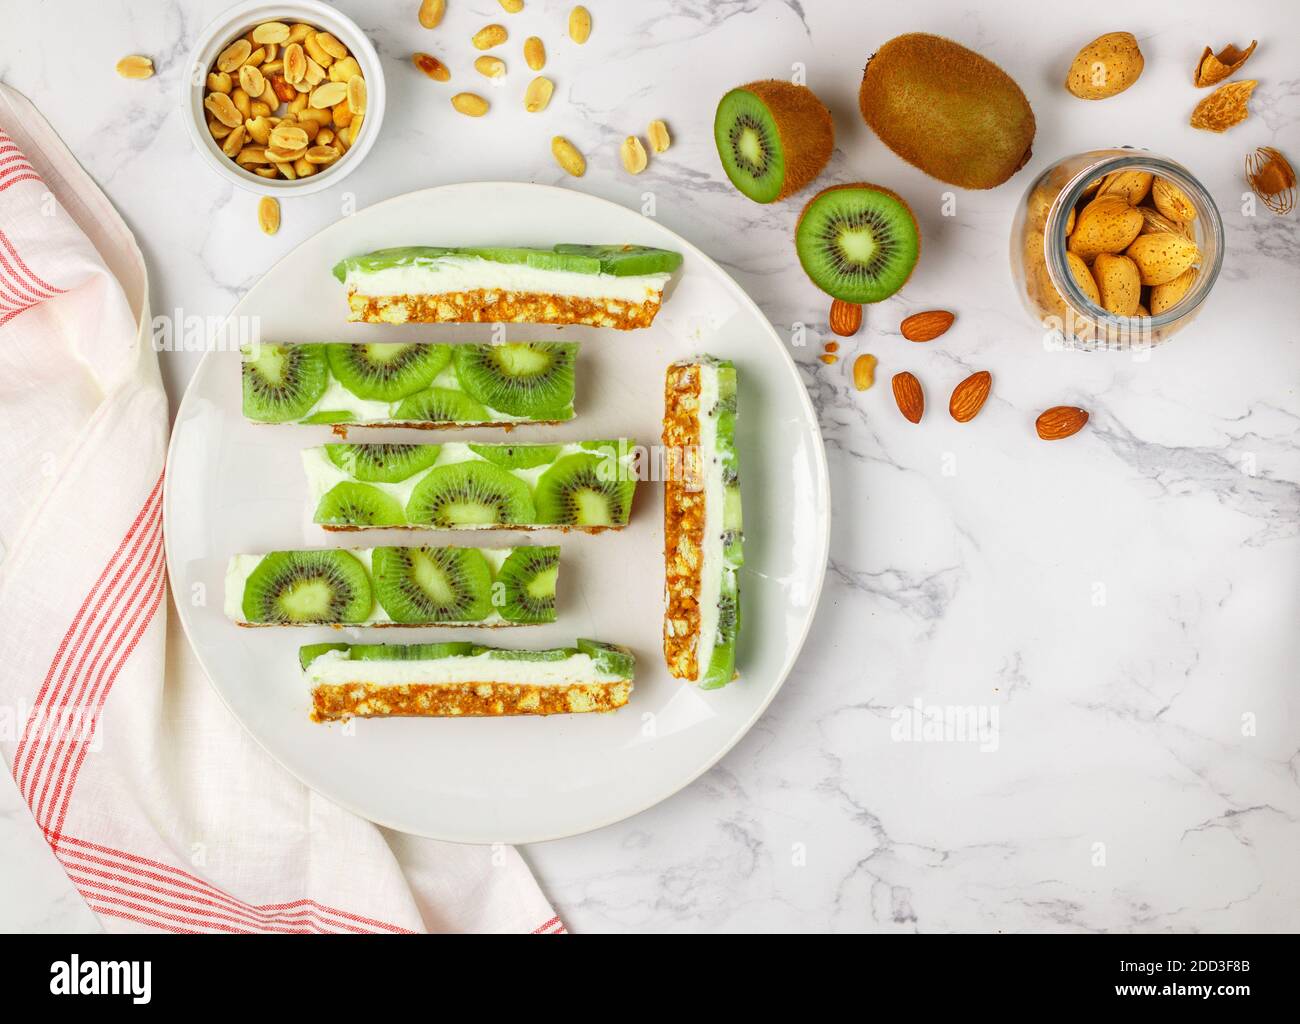 Homemade ricotta and kiwi Cheesecake. Delicious shortbread cake with nuts (almonds and peanuts) on a marble background. Healthy and delicious Breakfas Stock Photo